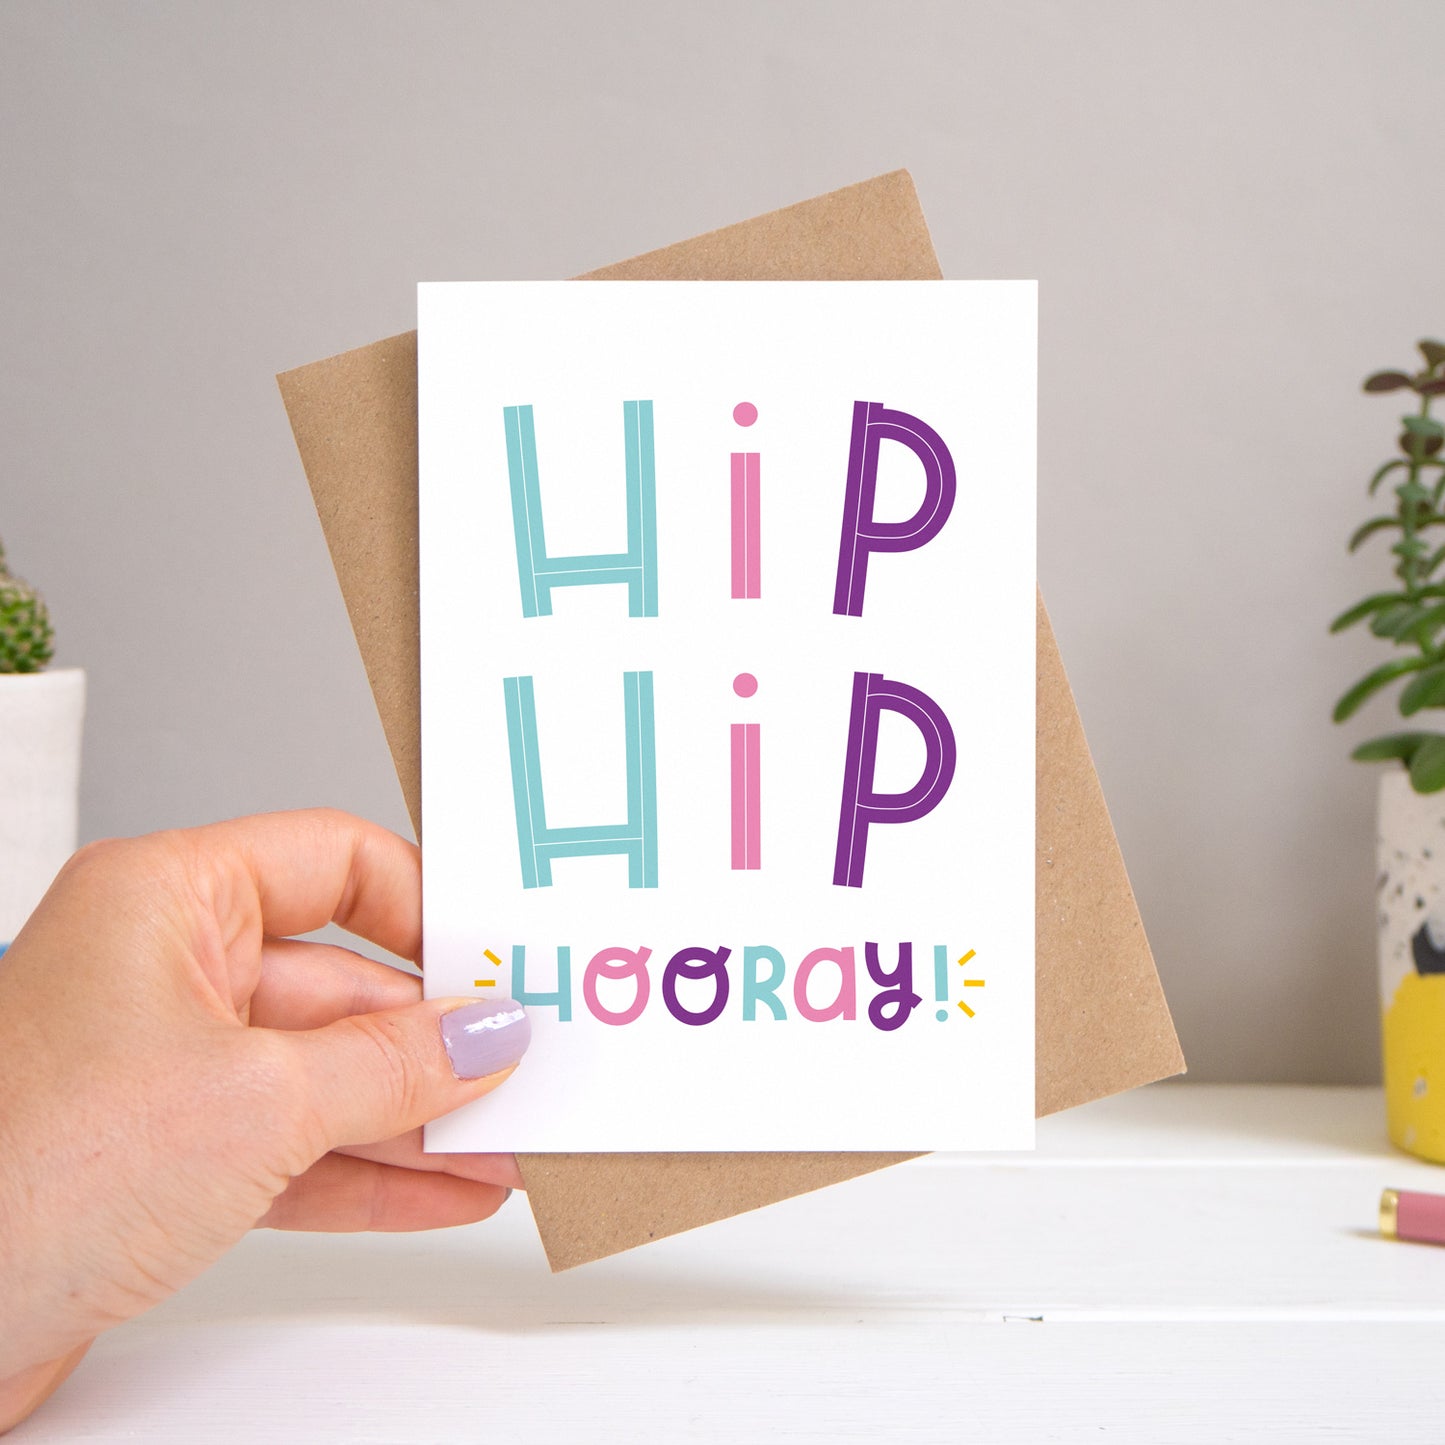 A ‘hip hip hooray!’ card held over a warm grey and white background with potted plants peeping the sides. Behind the card is a kraft brown envelope that comes with the card. The text on this version of the card is in varying tones of pink, purple and  blue.